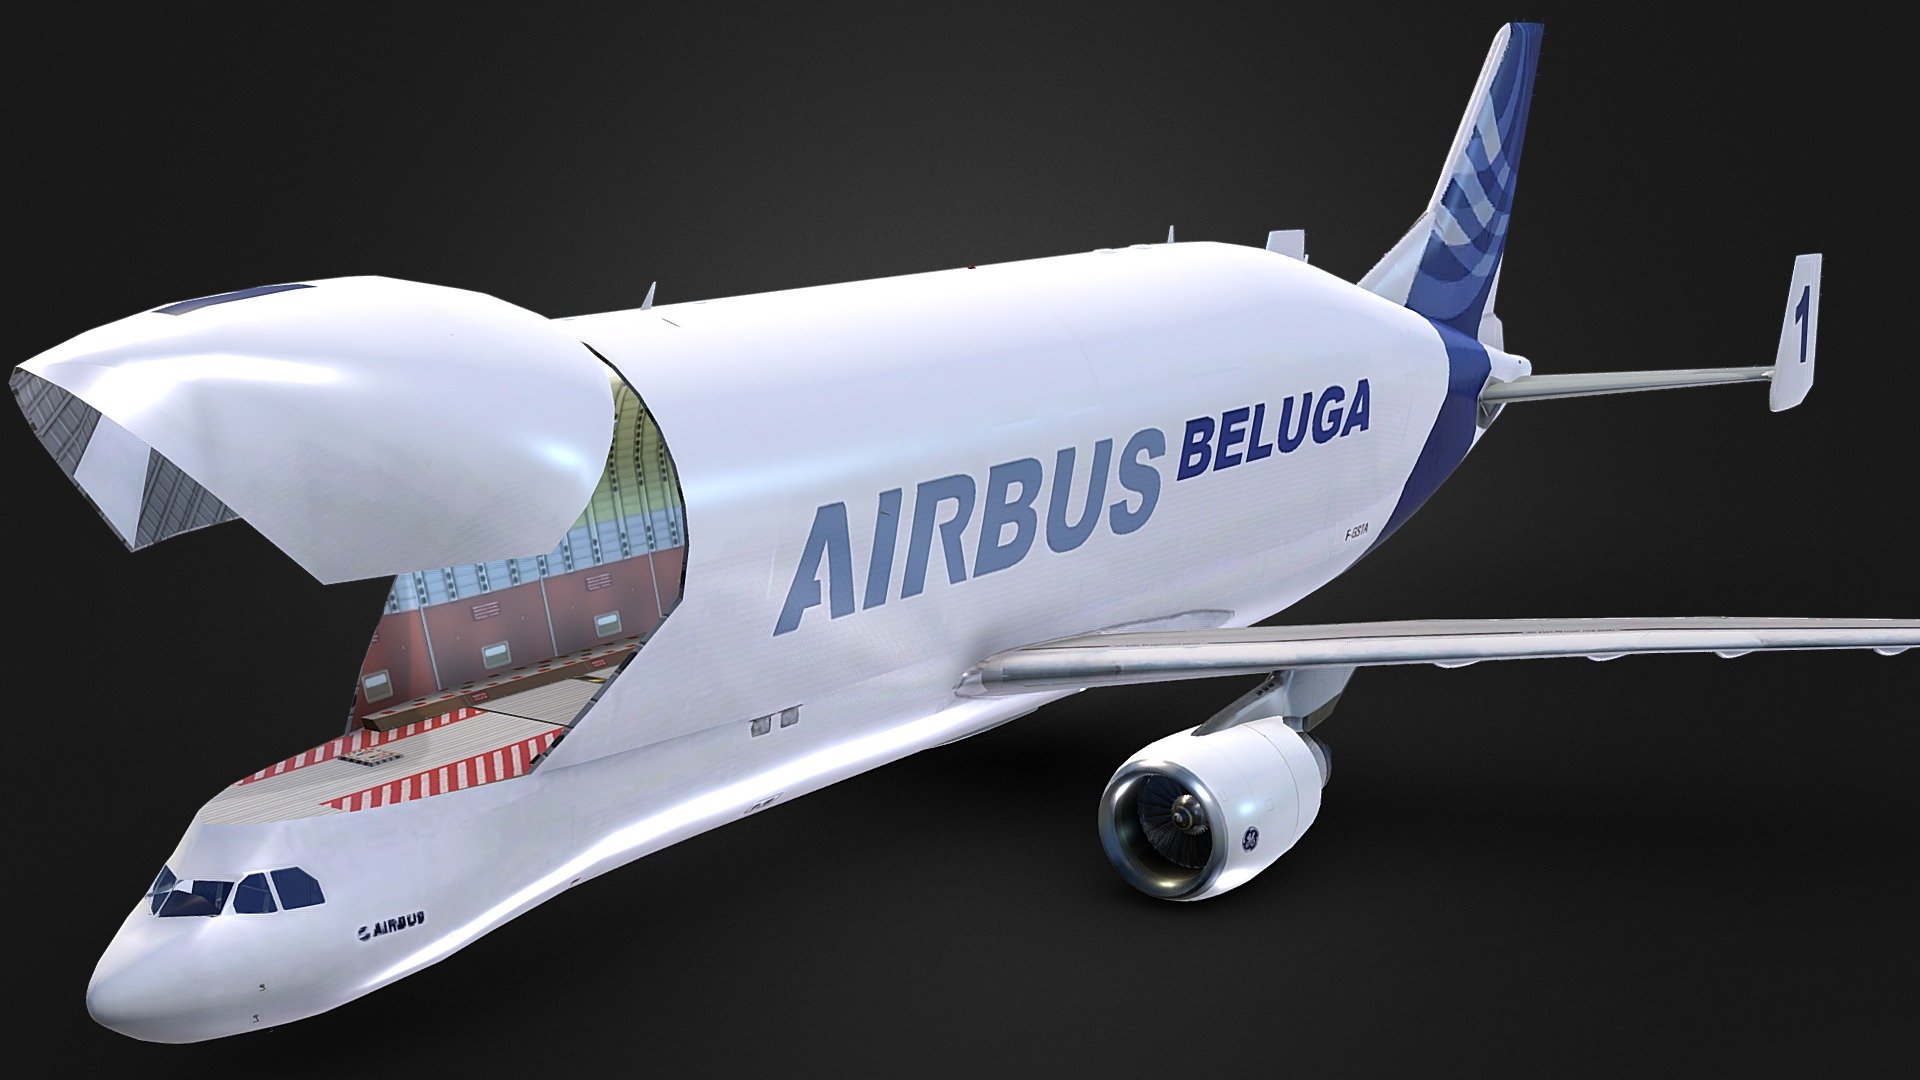 The Airbus A300-600ST (Super Transporter), or Beluga, is a specialised wide-body airliner used to transport aircraft parts and outsize cargoes. It received the official name of Super Transporter early on, but its nickname, after the beluga whale, which it resembles, gained popularity and has since been officially adopted.

Due to Airbus's manufacturing facilities being dispersed, the company had a long term need to transport sizeable components, such as wings and fuselage sections, to their final assembly lines.

Construction of the first aircraft began during September 1992; it performed its maiden flight on 13 September 1994. Entering service in September 1995, the Super Transporter was a larger, faster, and more efficient aircraft than the preceding Super Guppies 3d model